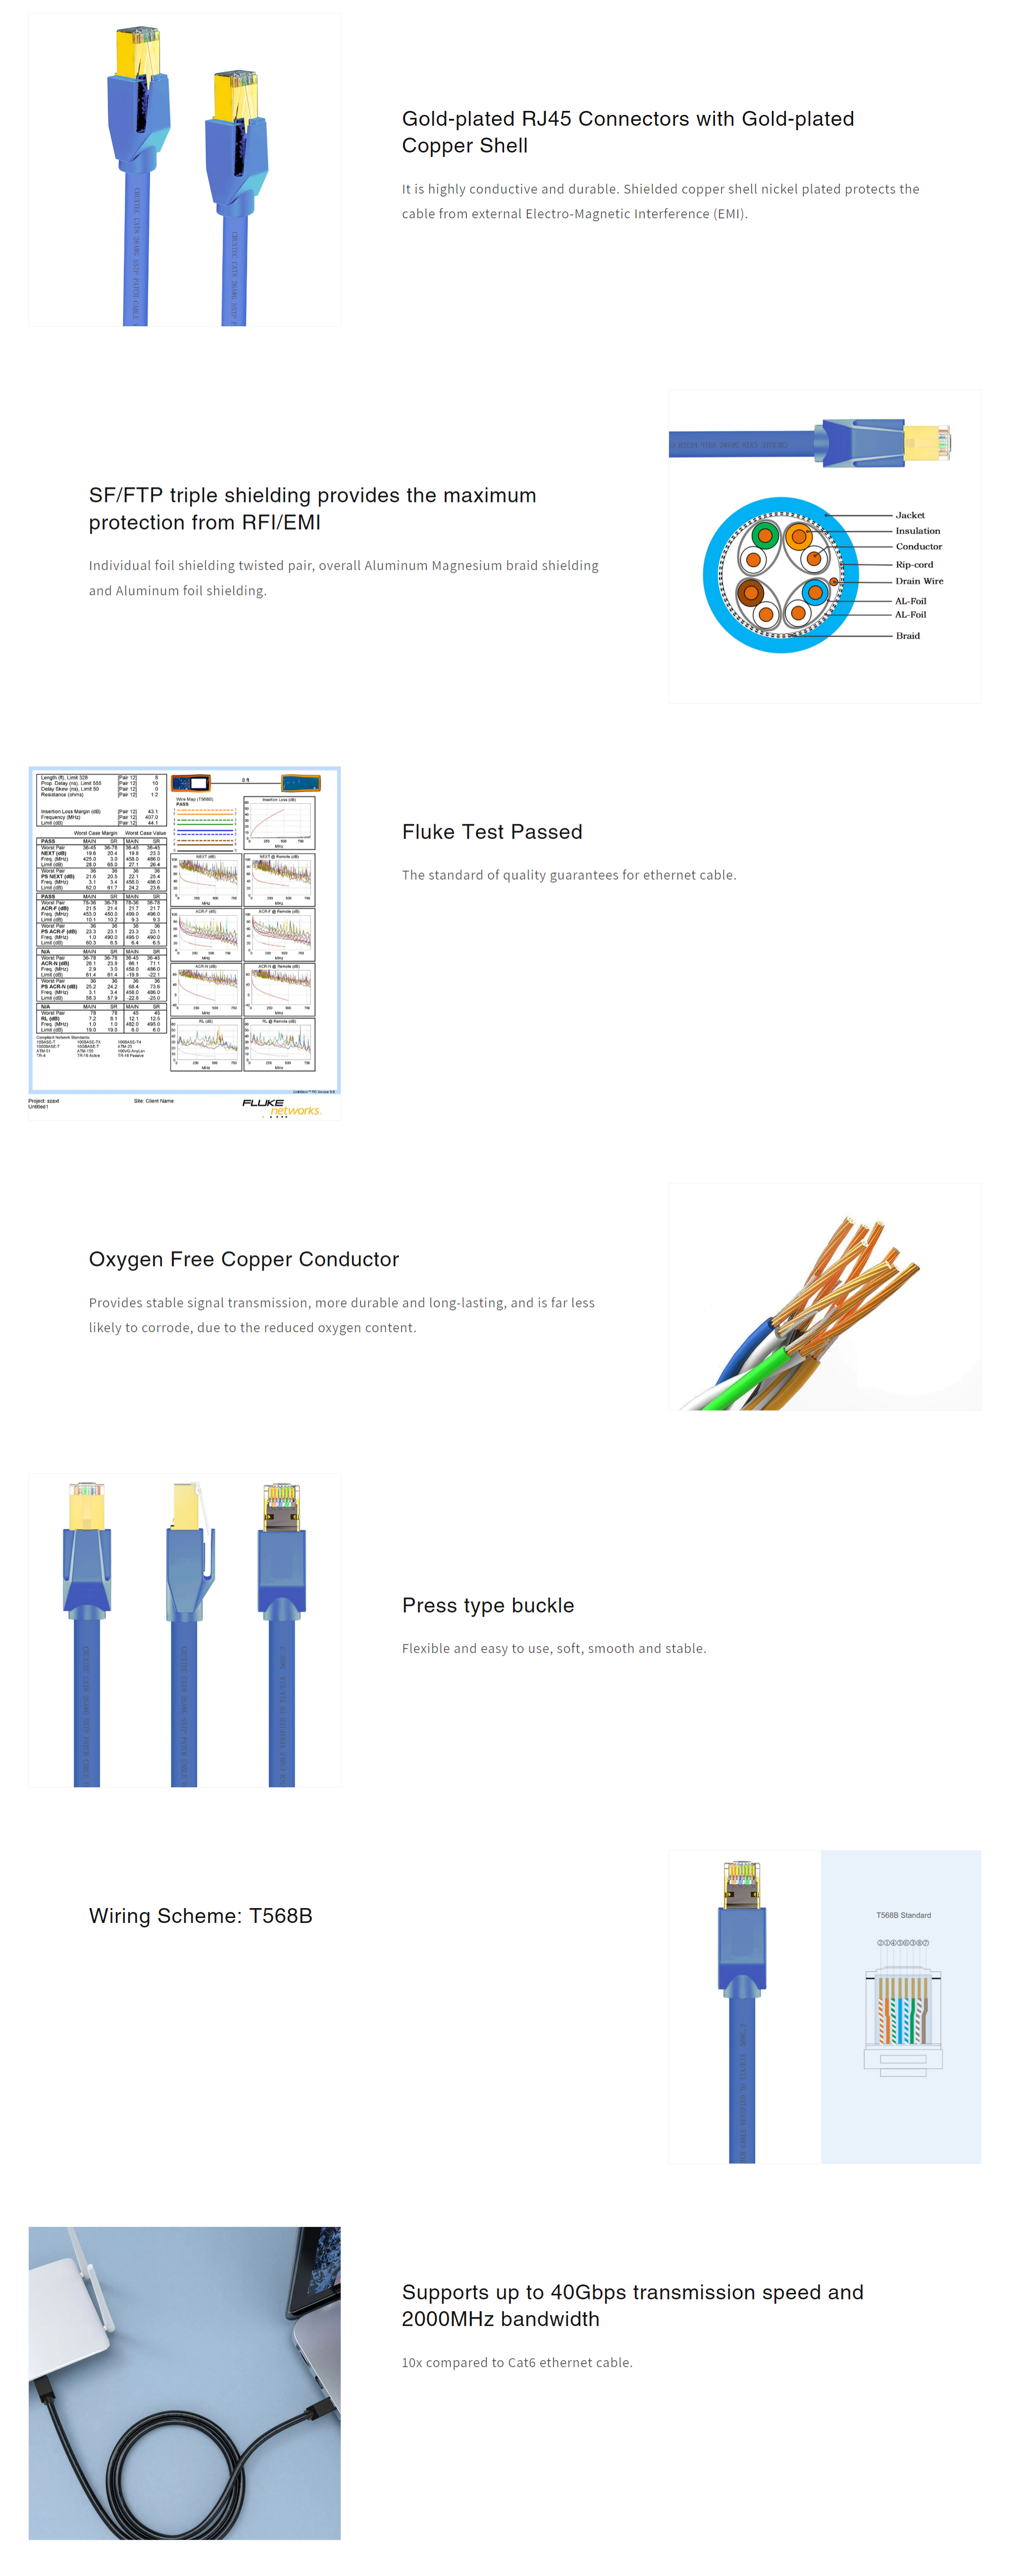 A large marketing image providing additional information about the product Cruxtec CAT8 2m 40GbE SF/FTP Triple Shielding Ethernet Cable Blue - Additional alt info not provided